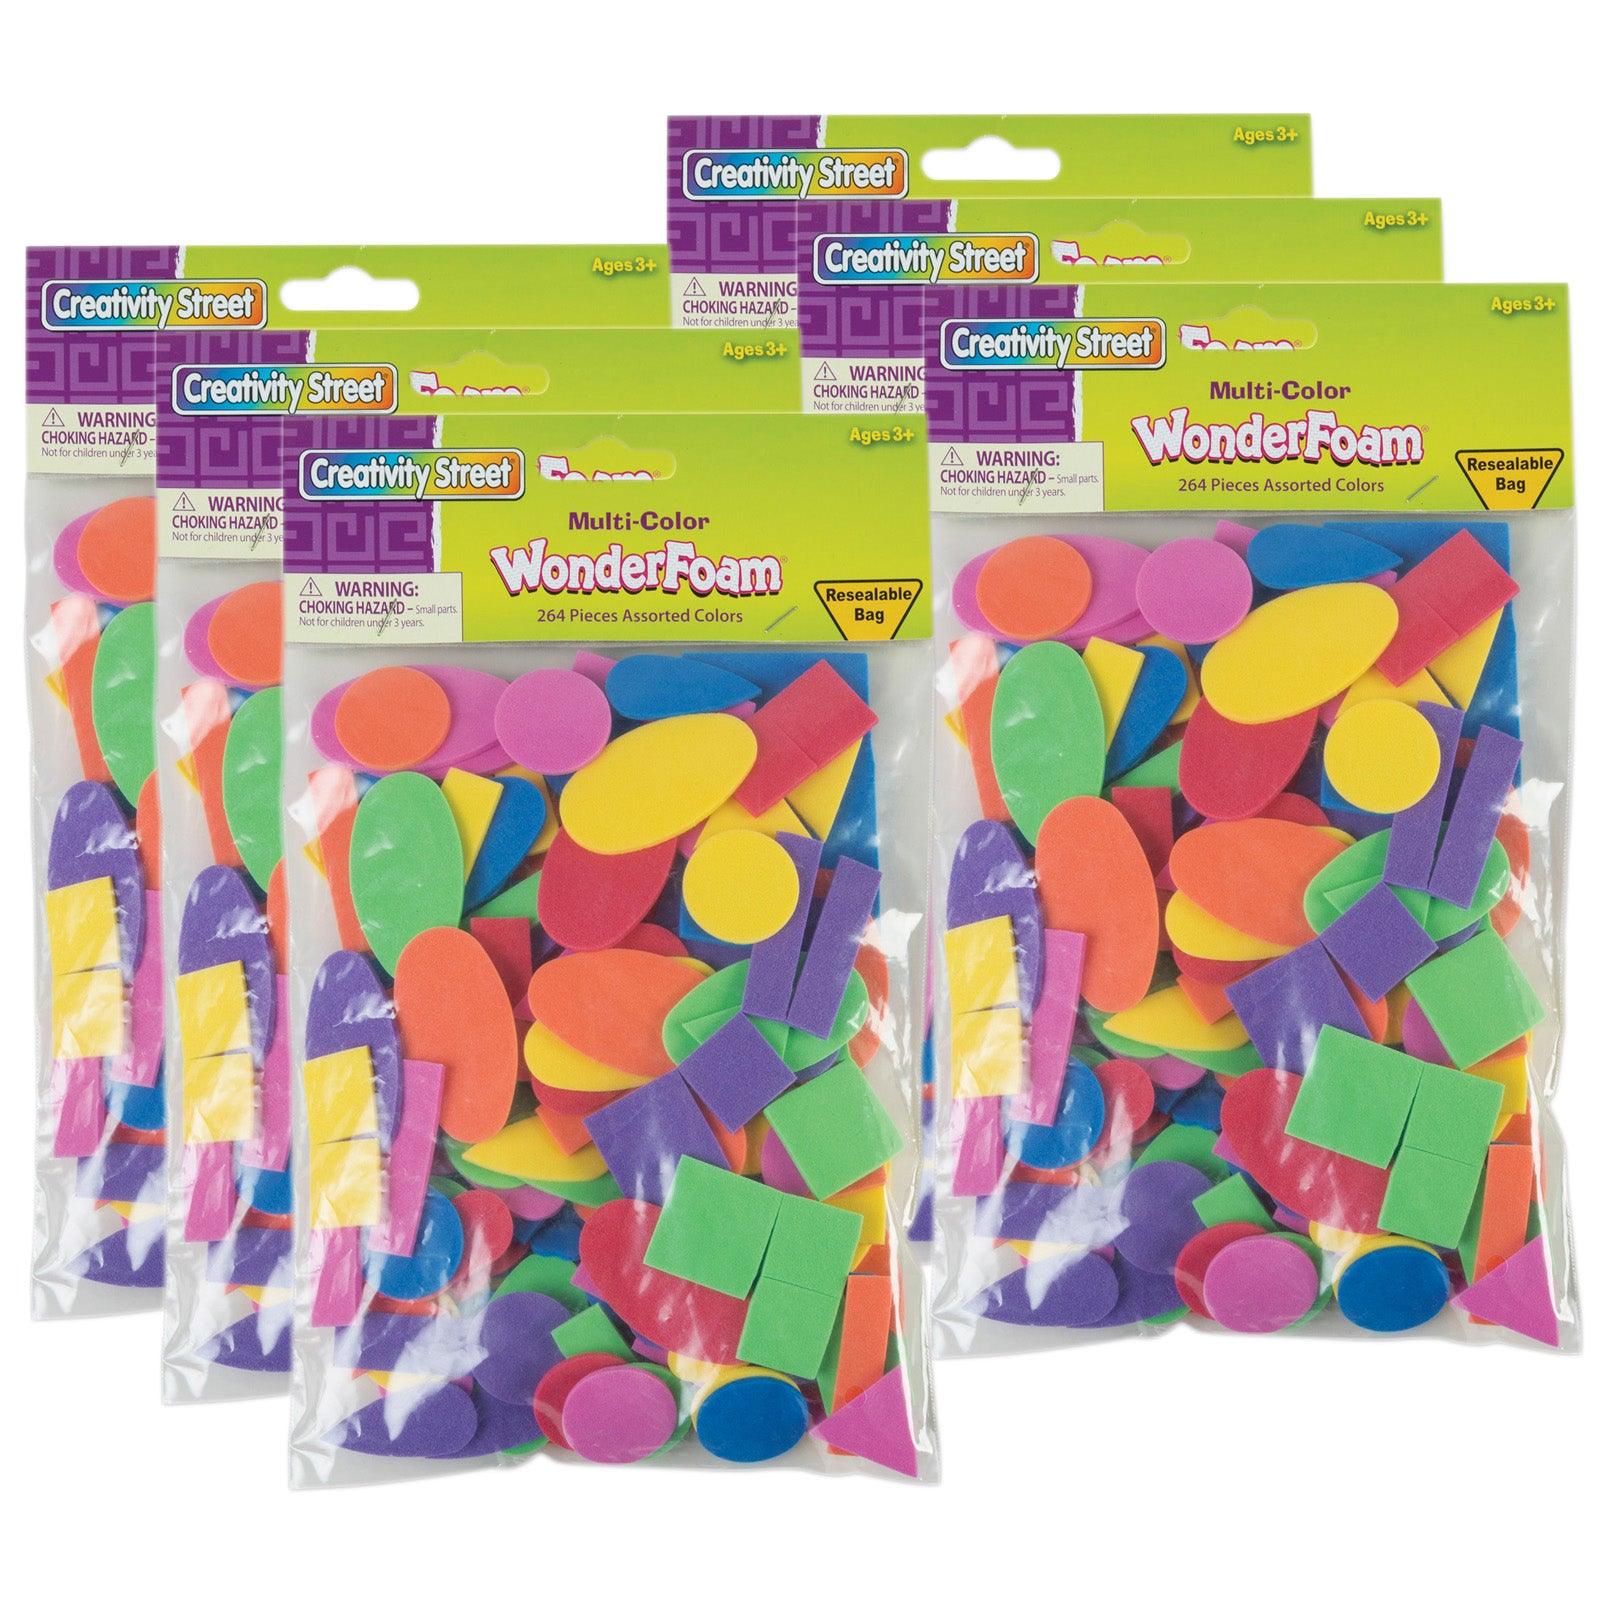 Shapes Assortment, Assorted Colors & Sizes, 264 Pieces - Loomini